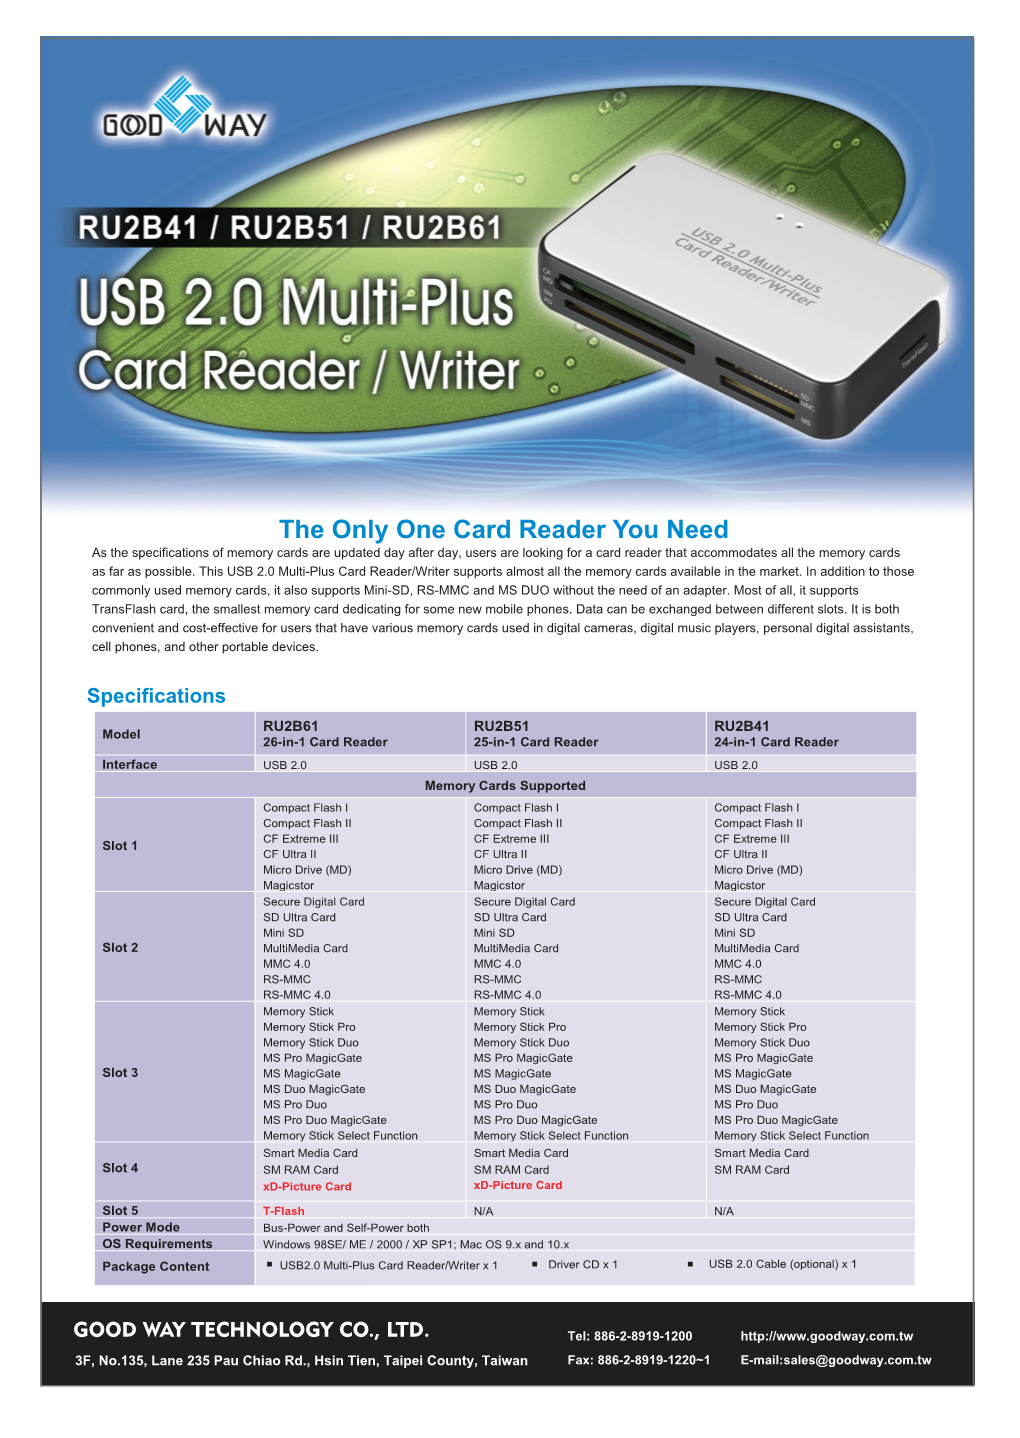 The Only One Card Reader You Need